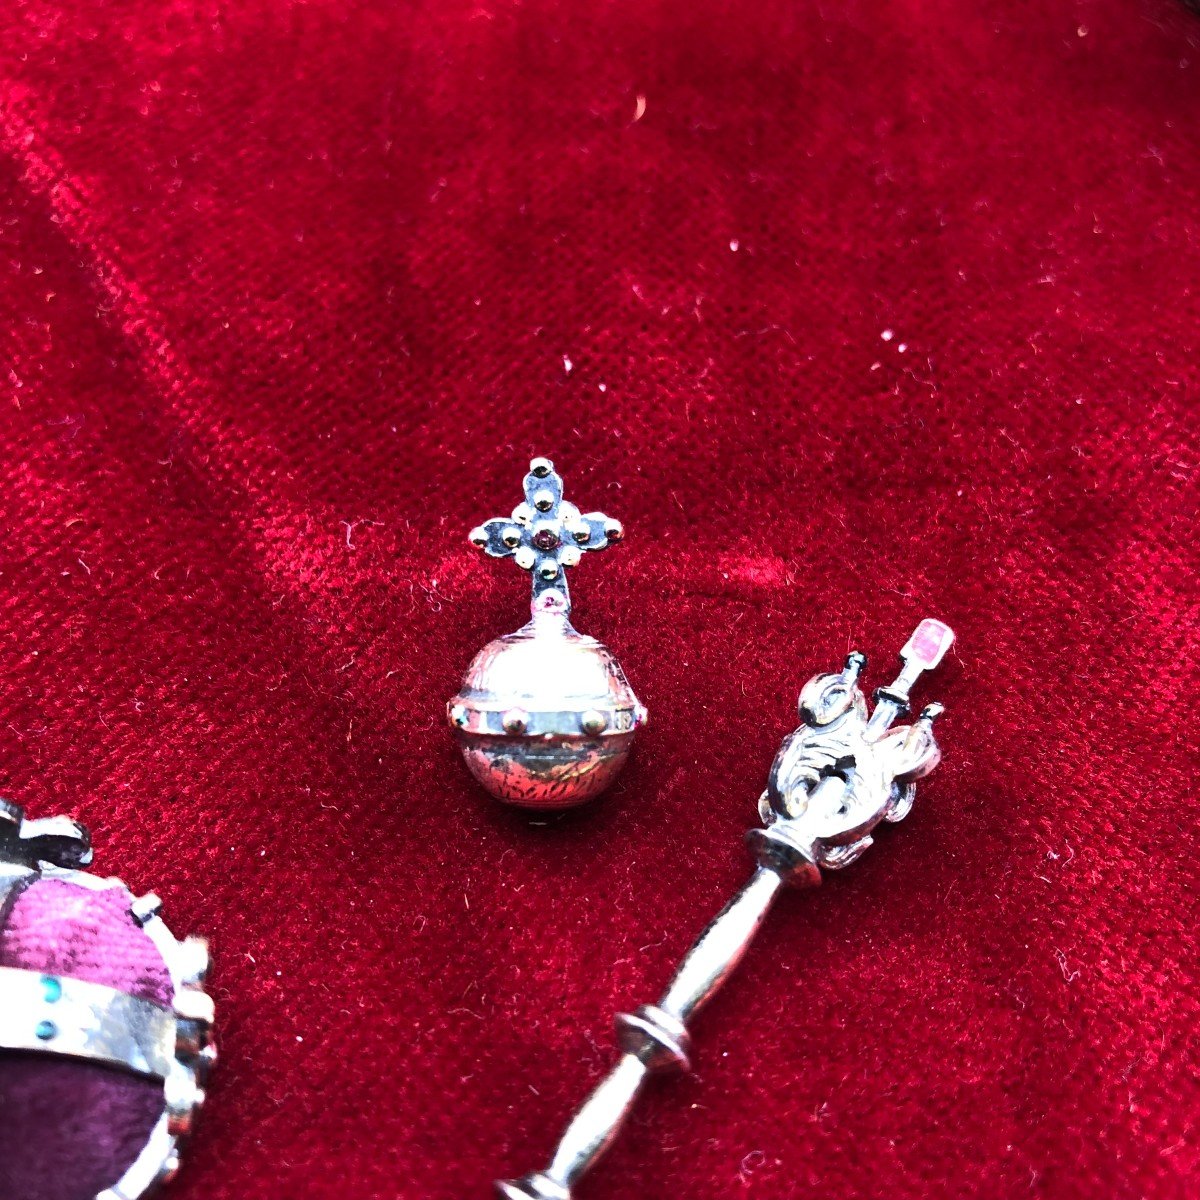 Miniature Royal And Imperial Insignia Of The Holy German Empire, Scepter, Crown And Earthly Orb-photo-1